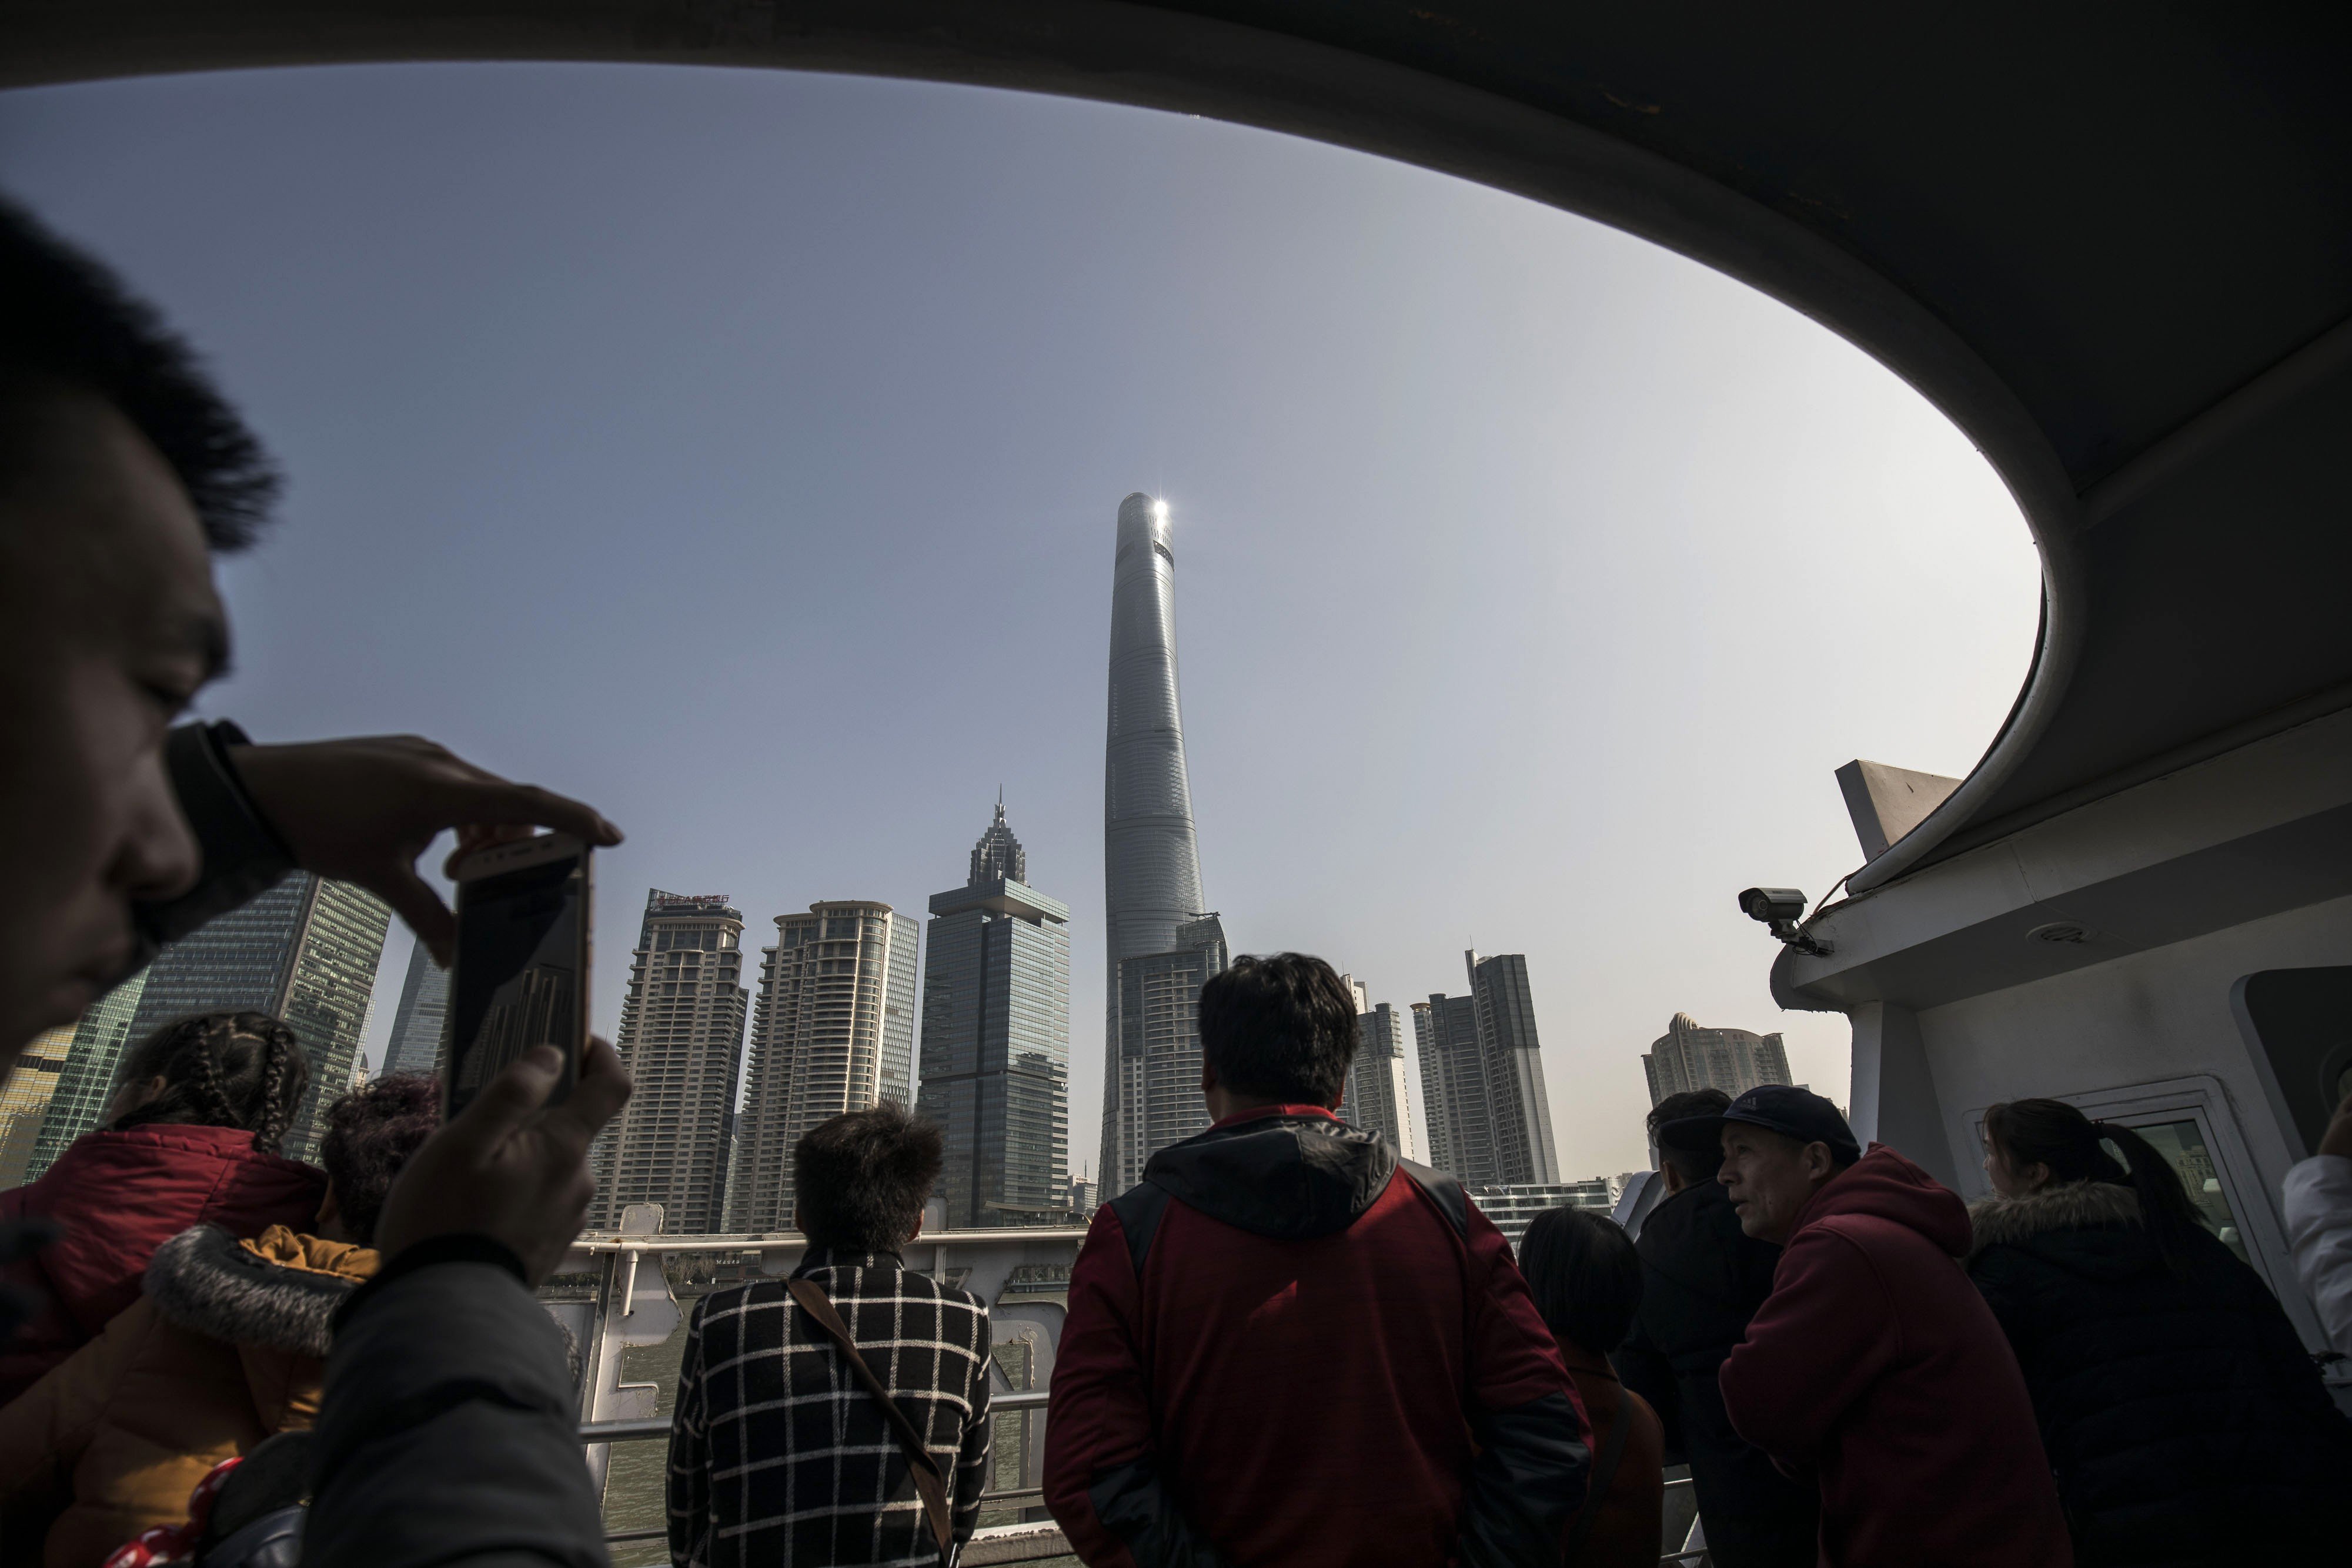 Tourists take a ferry across the Huangpu River in front of the Lujiazui Financial District in Shanghai. Finance is one sector of the Chinese economy that experts say needs to be opened up. Photo: Bloomberg